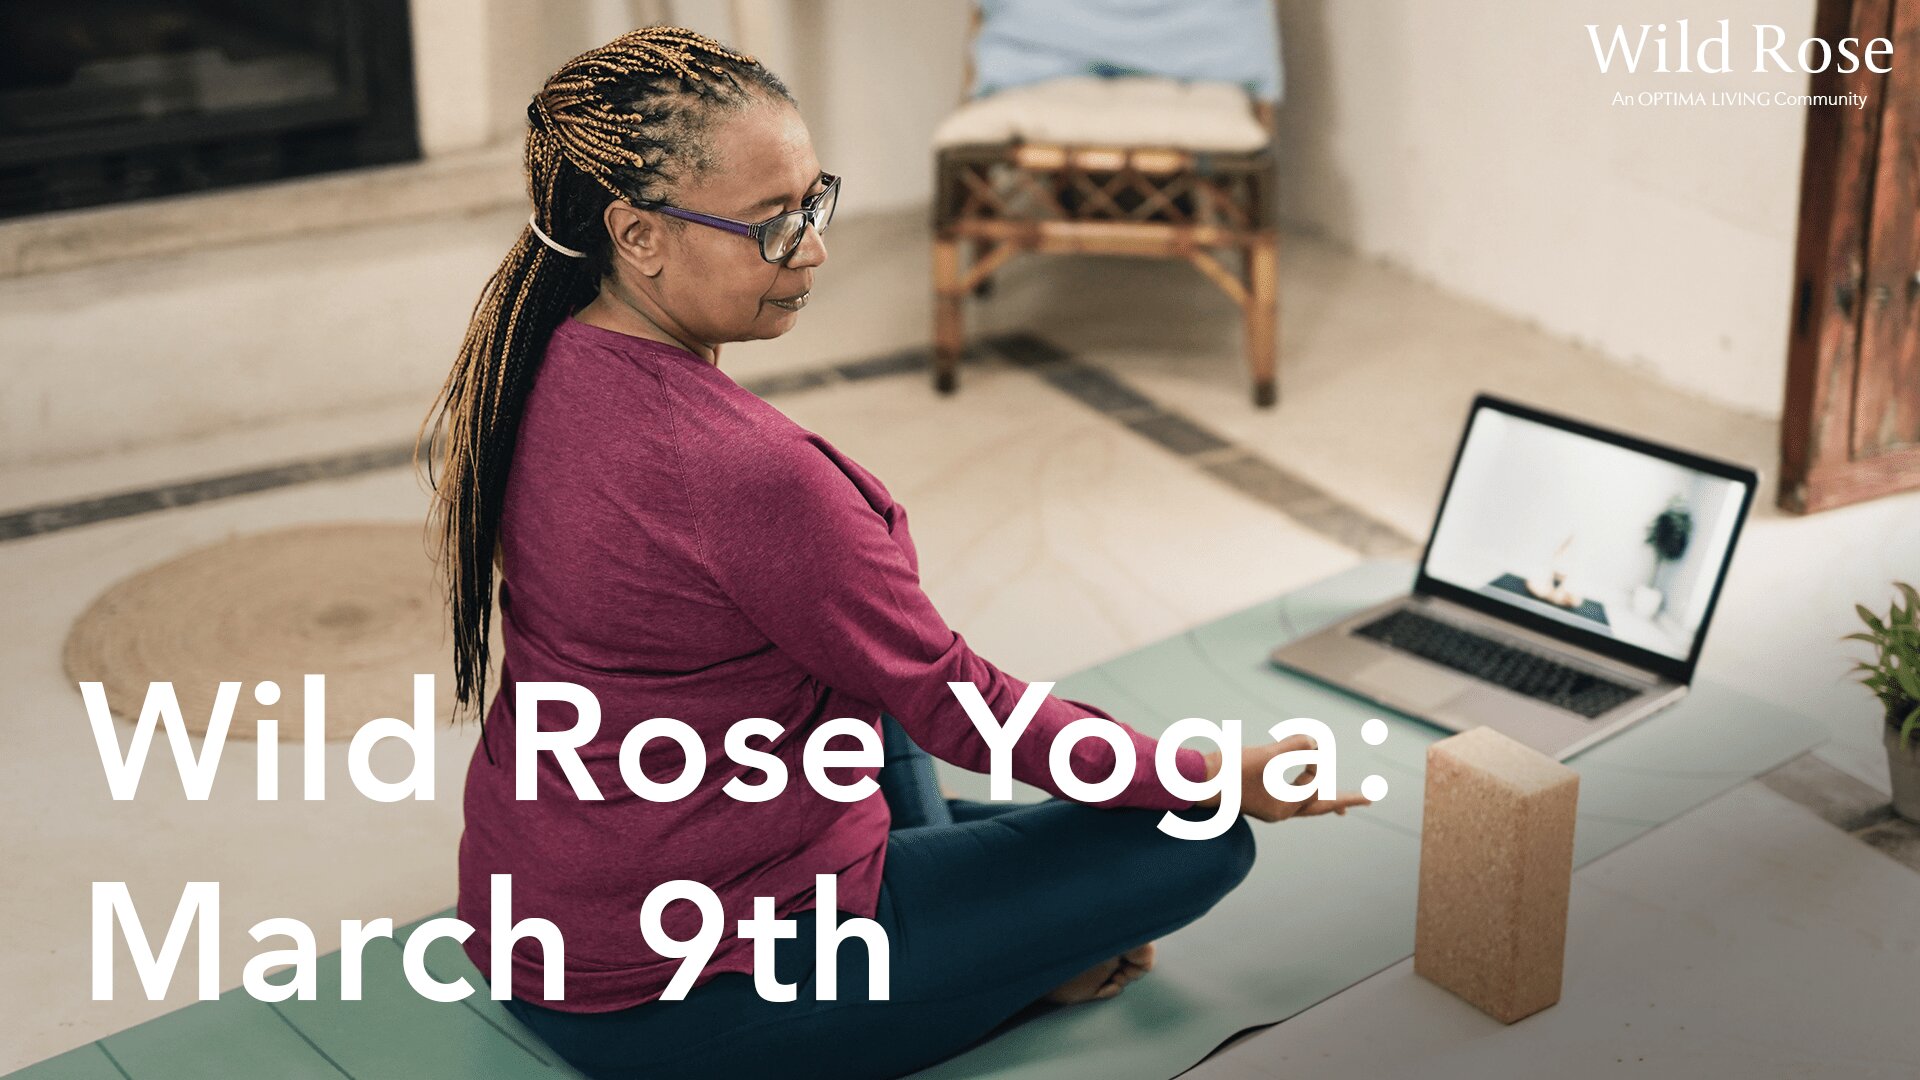 Wild Rose stretching exercises for seniors: March 9th